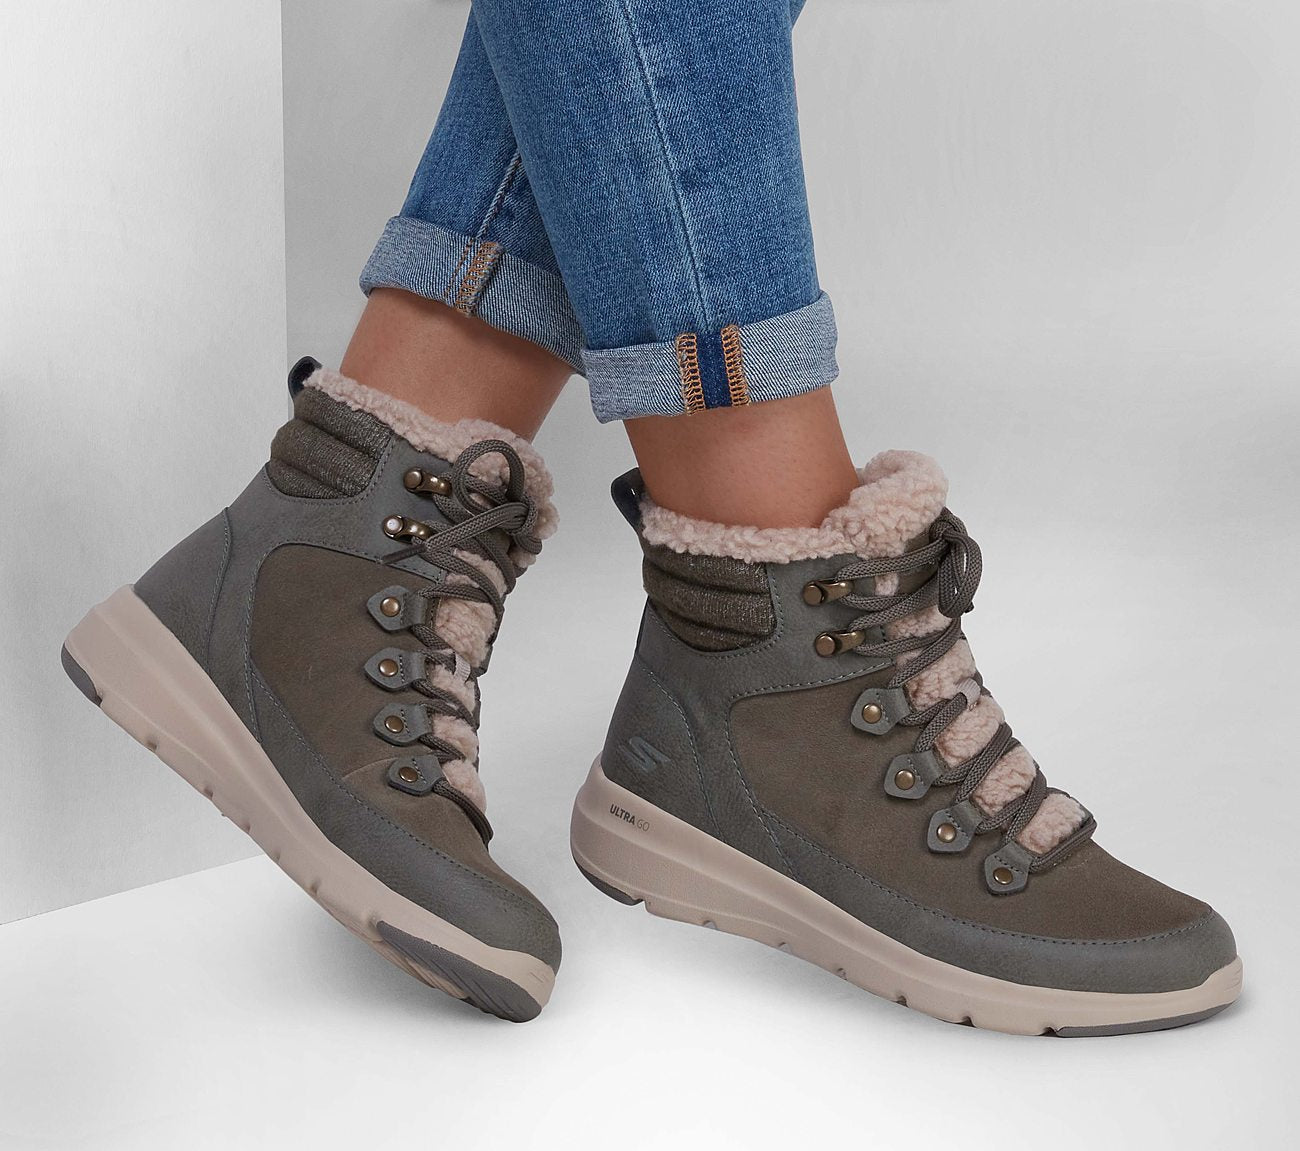 Glacial Ultra - Countryside Water Repellent Boot Skechers